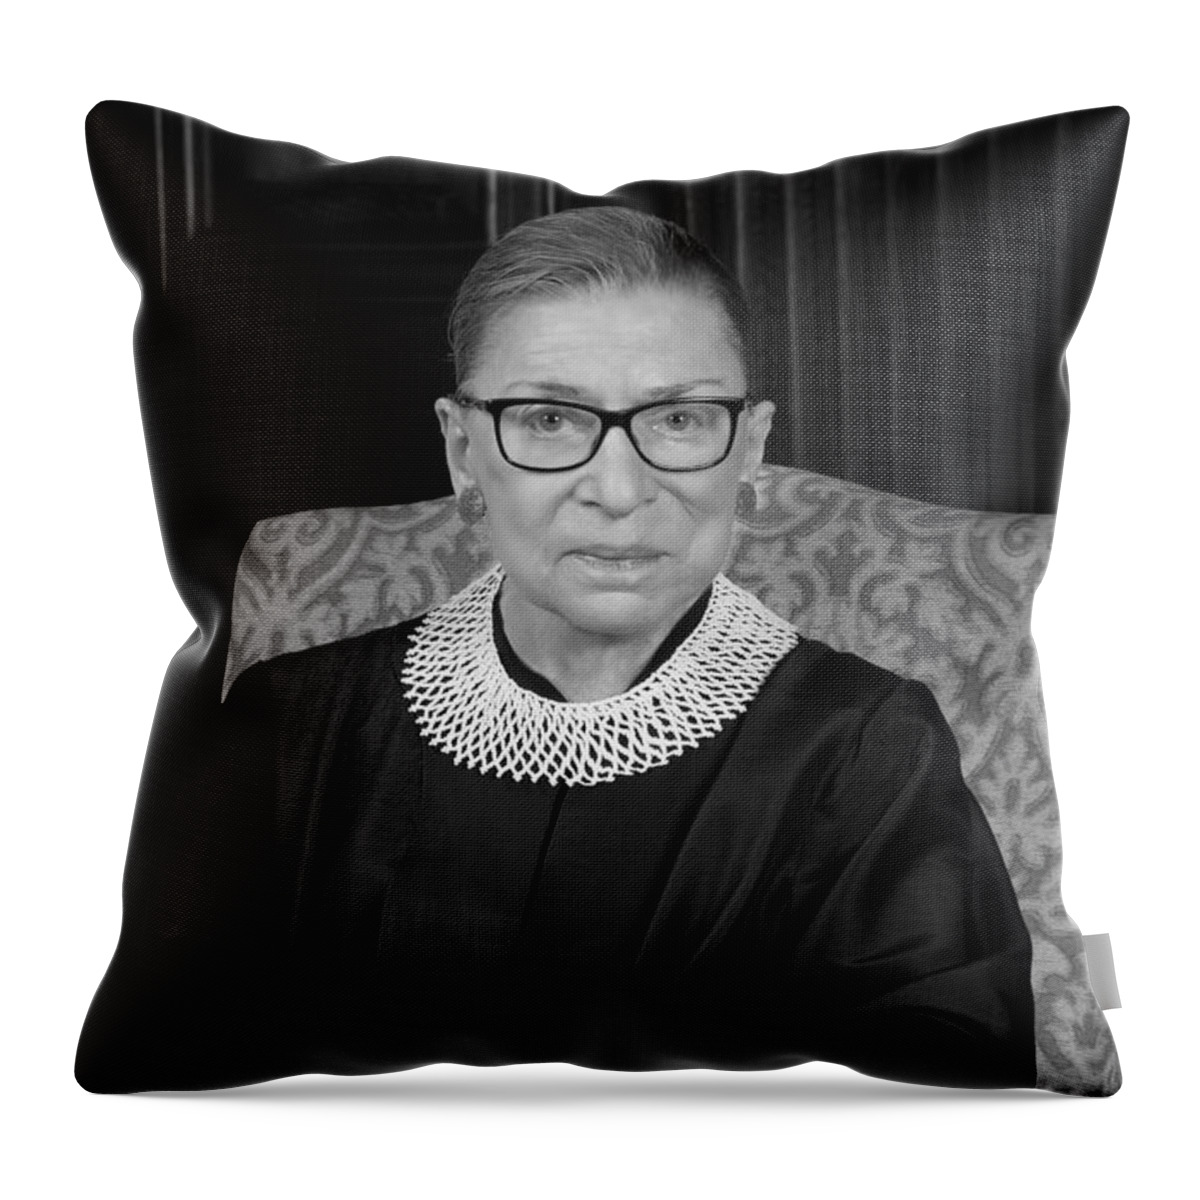 Ruth Bader Ginsburg Throw Pillow featuring the photograph Ruth Bader Ginsburg Portrait - 2016 by War Is Hell Store